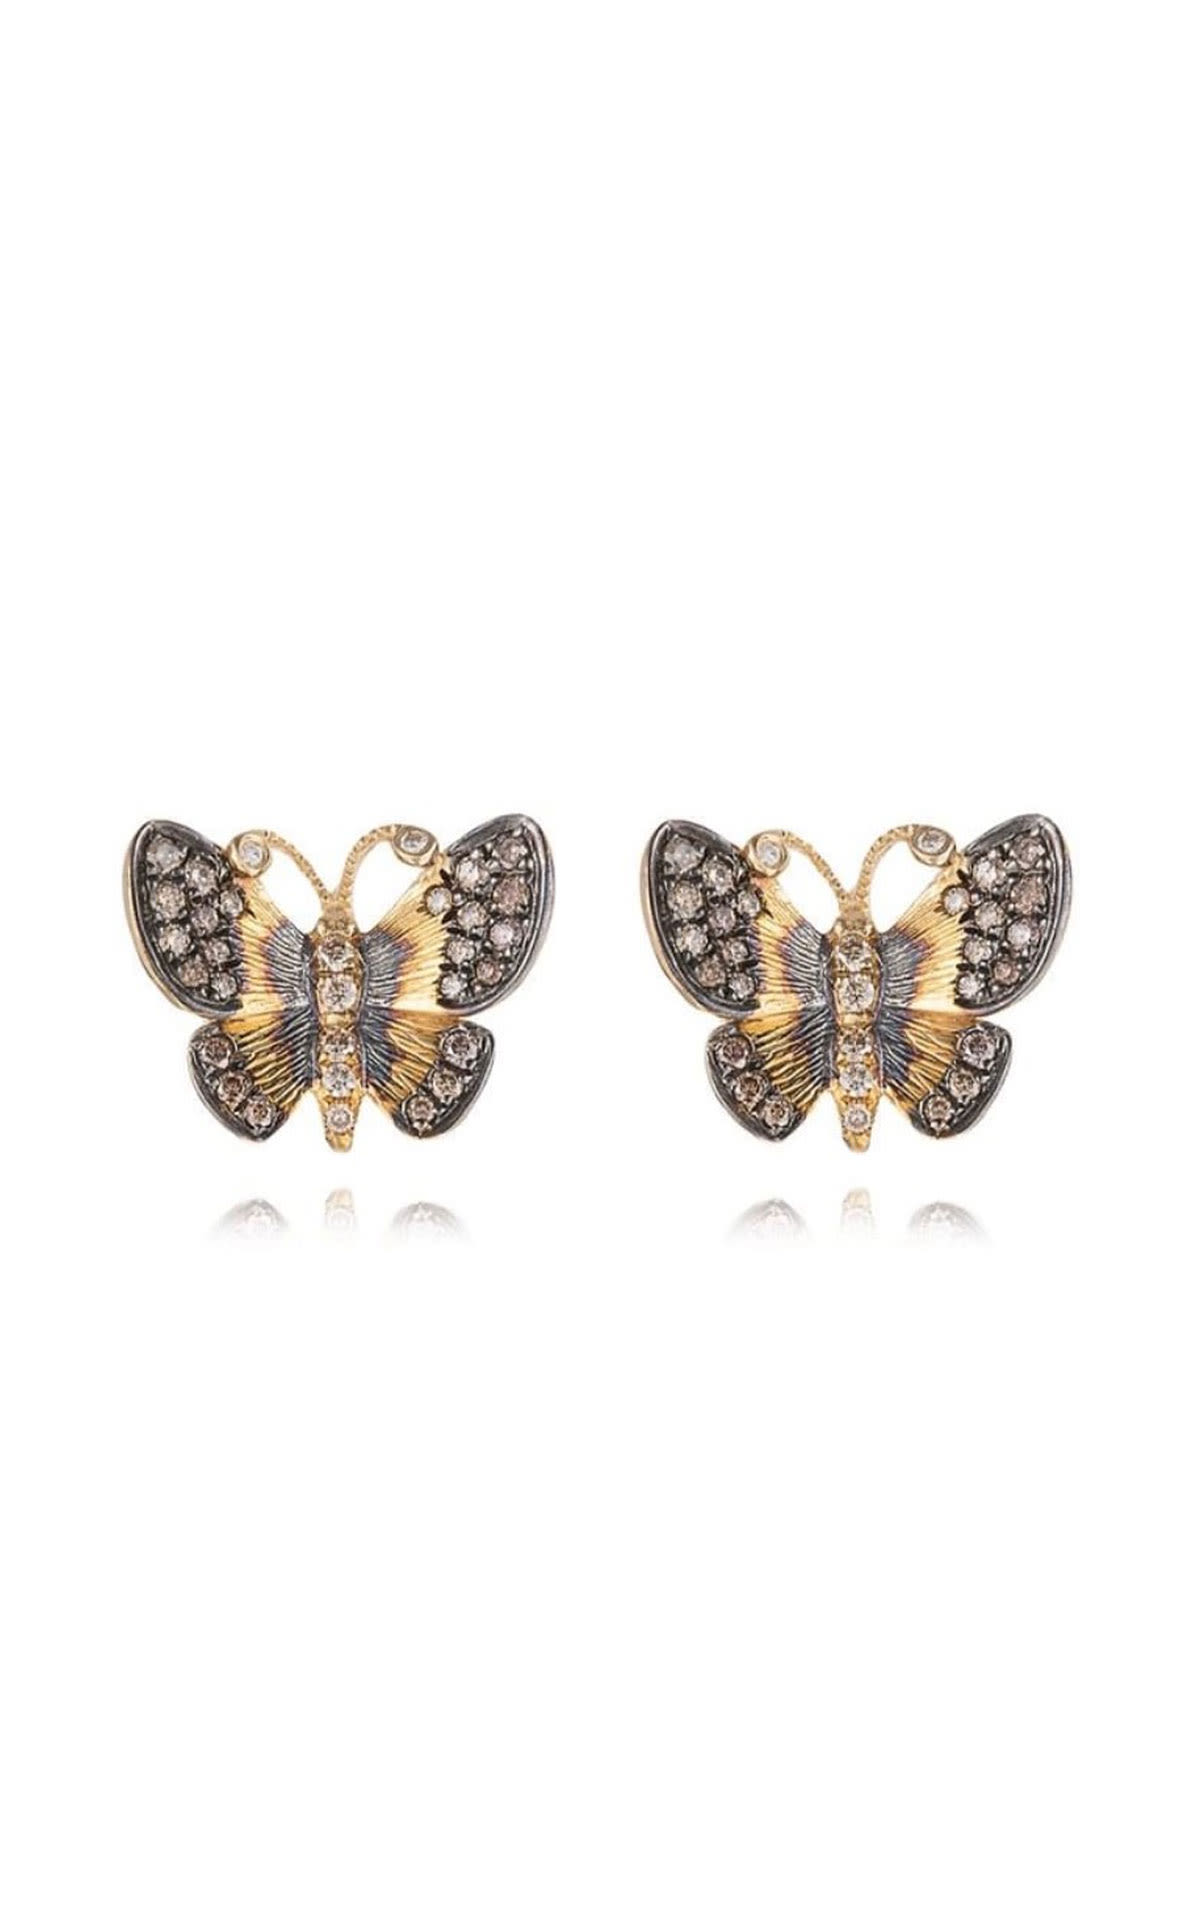 Annoushka 18ct yellow gold and diamond butterflies studs from Bicester Village